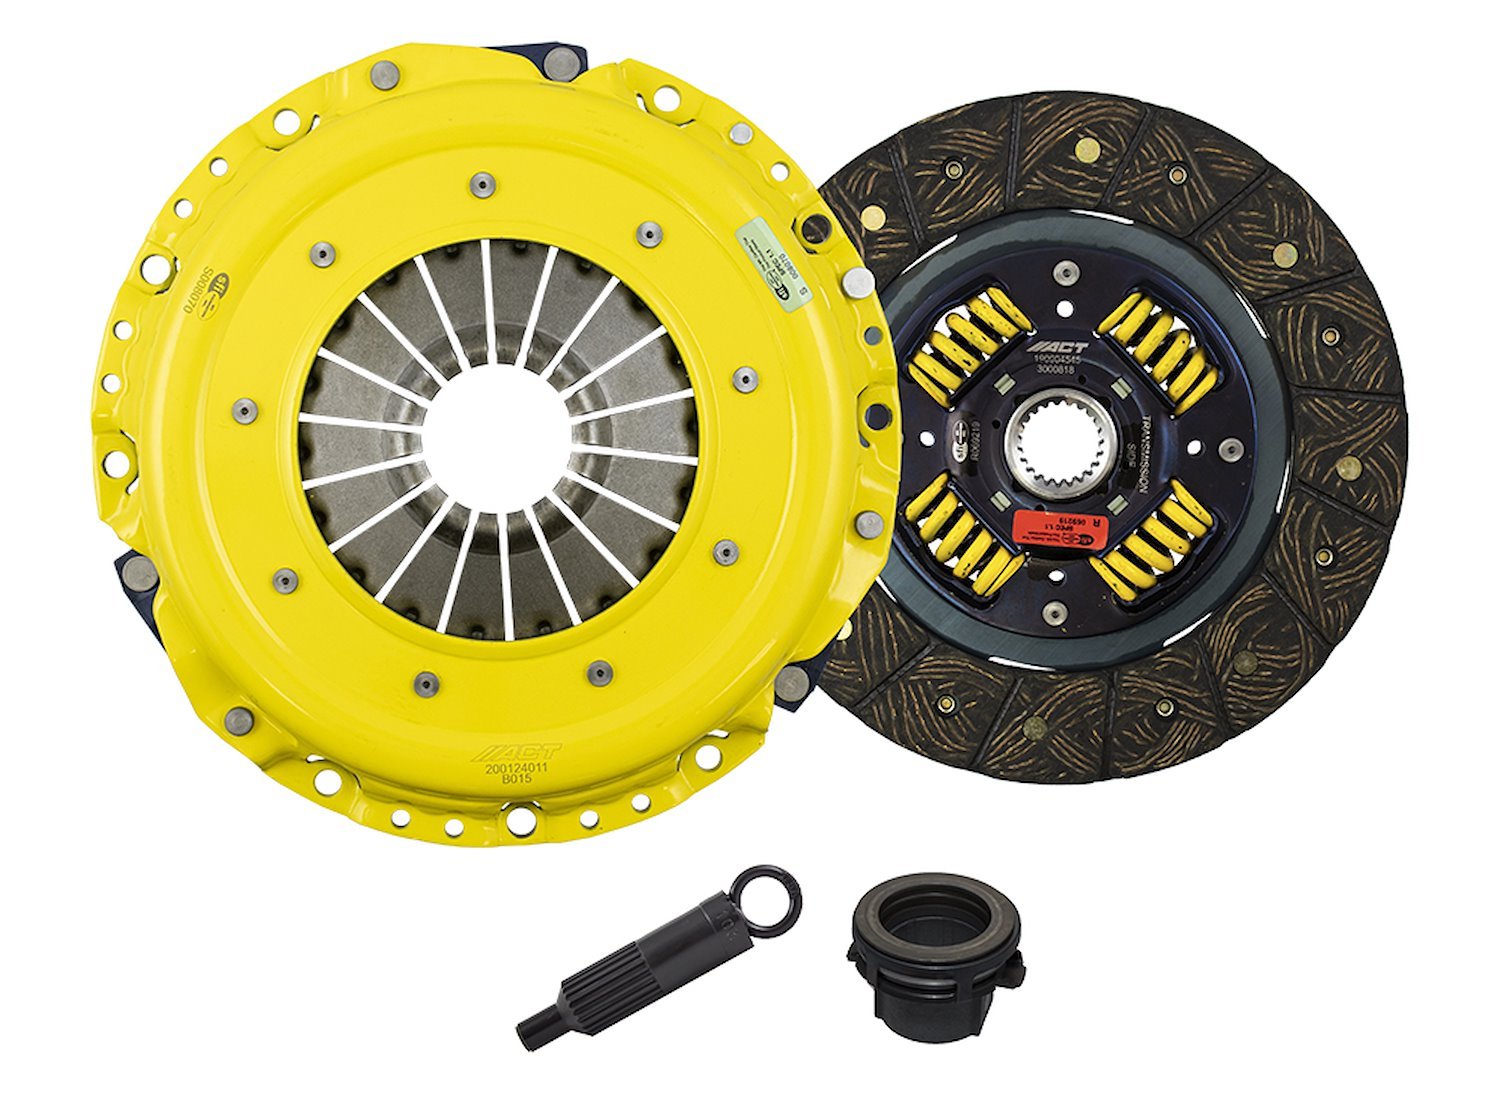 ACT HD/Performance Street Sprung Clutch Transmission Clutch Kit Fits Select BMW